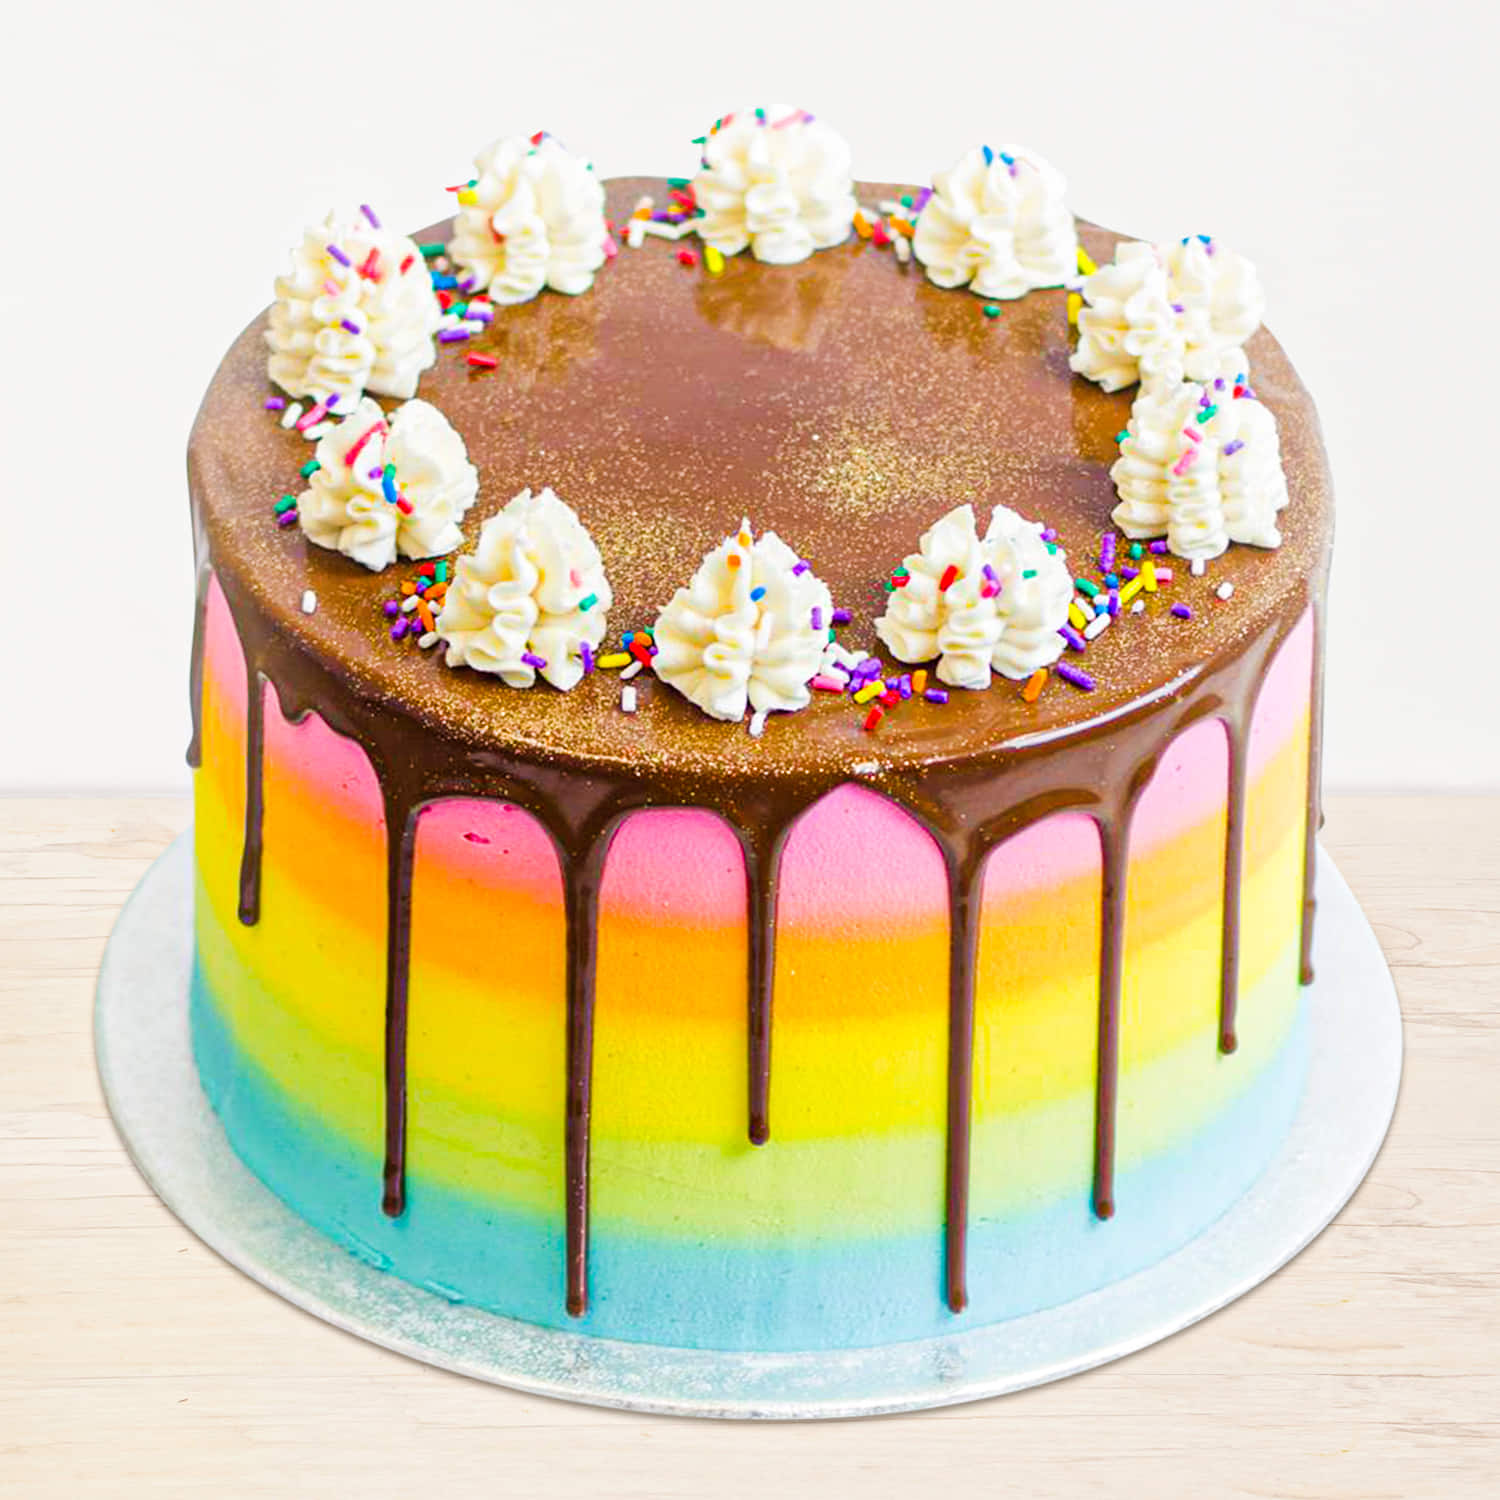 Easy Rainbow Cake Recipe From Scratch!